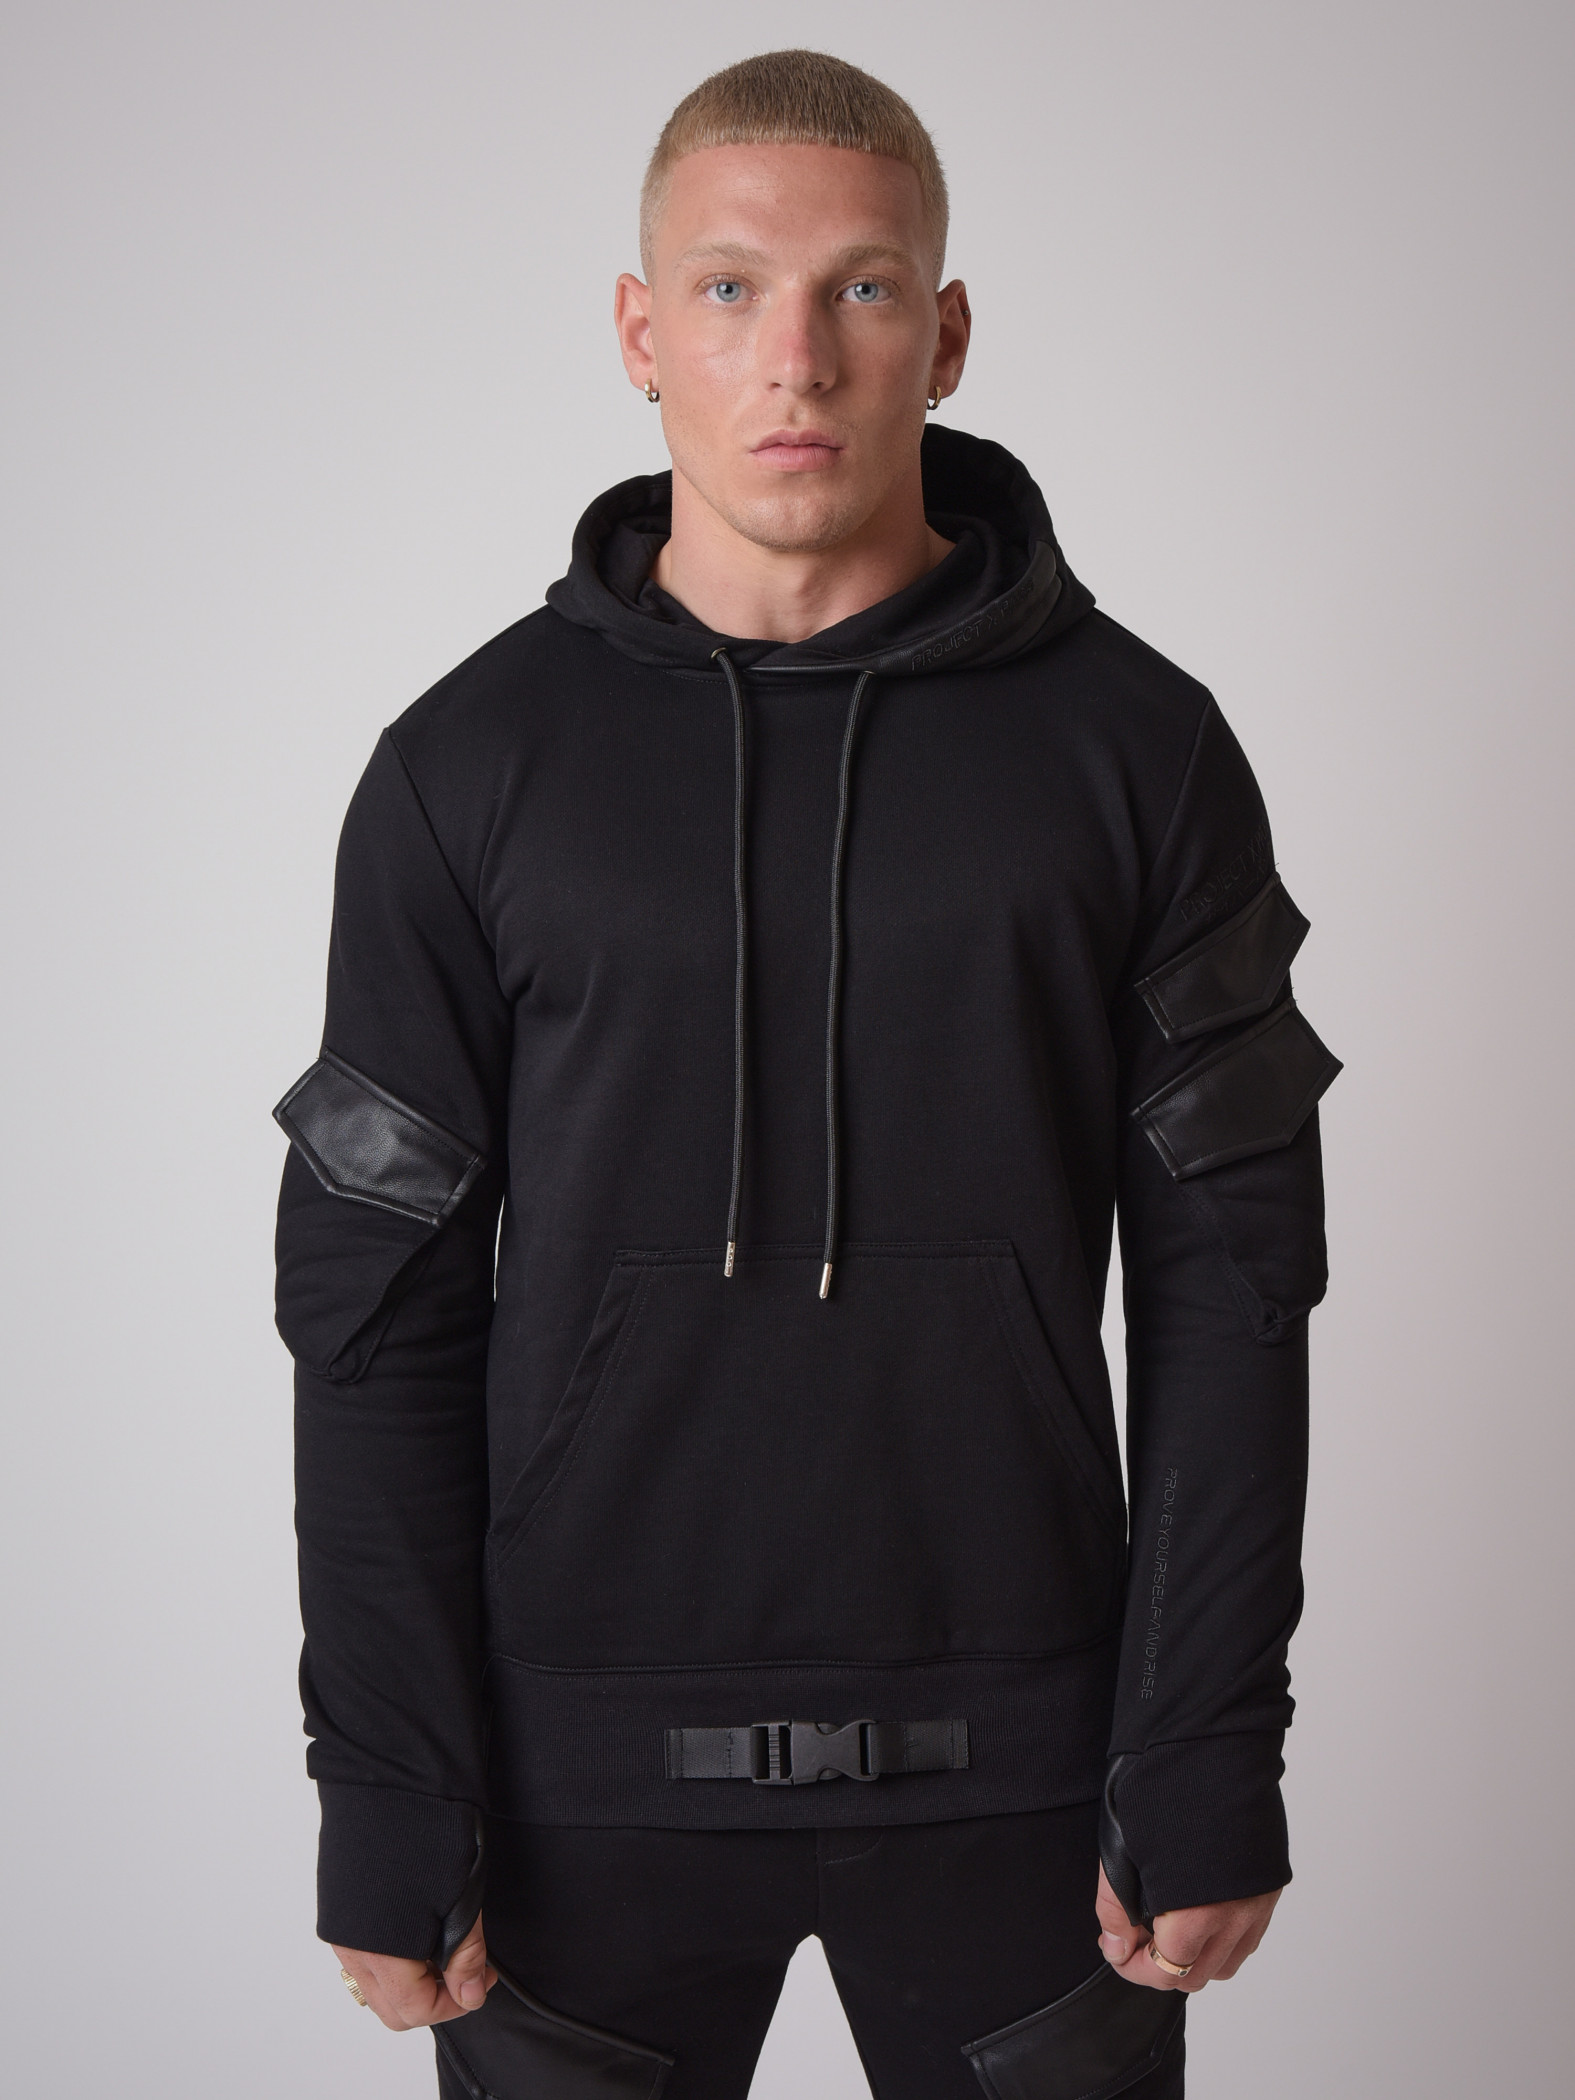 Hoodie with leather detail and clip